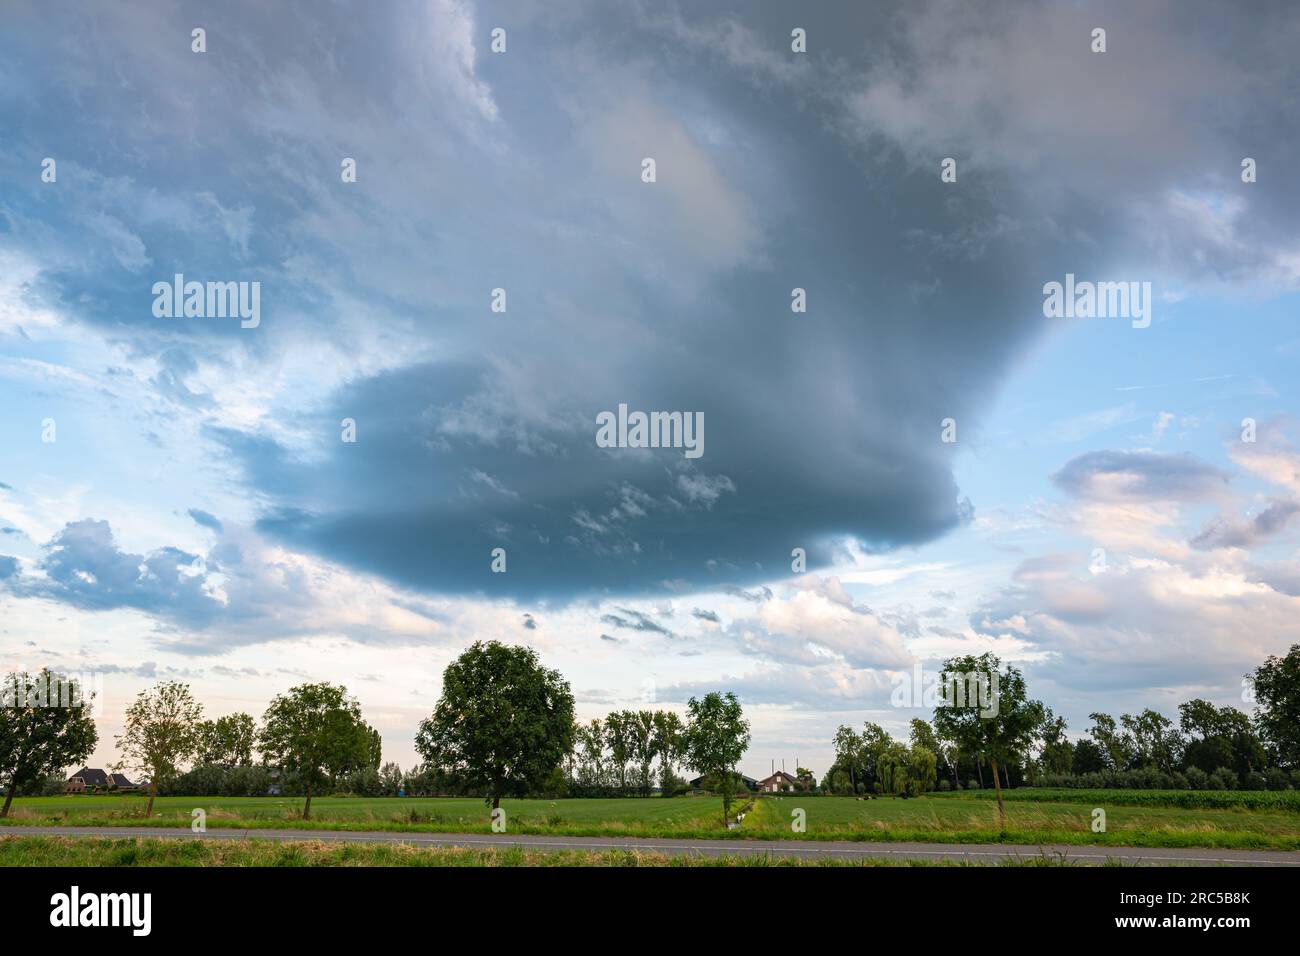 Rotating wall cloud of a small LP (low precipitation) supercell storm Stock Photo